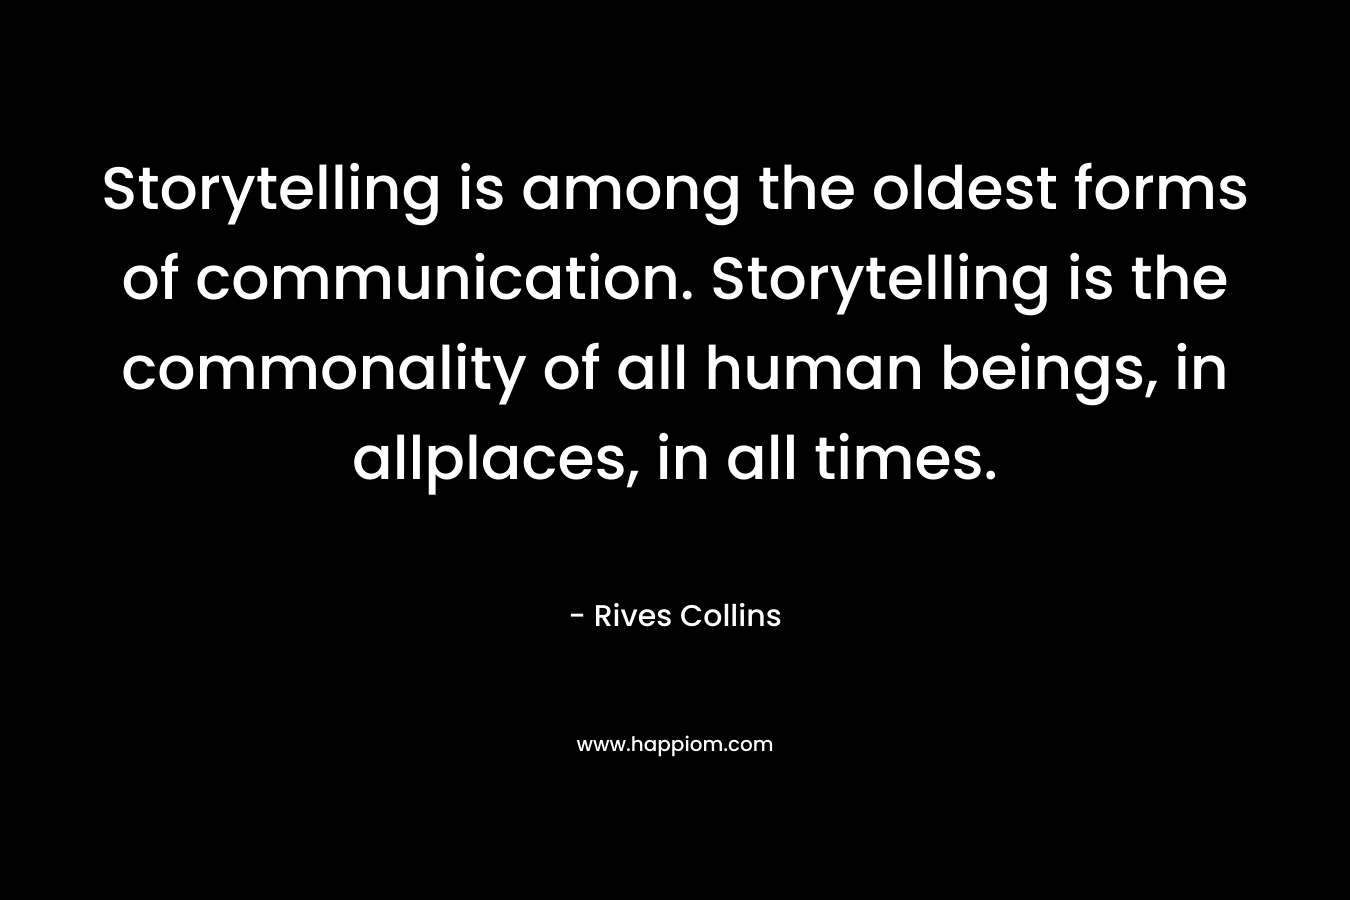 Storytelling is among the oldest forms of communication. Storytelling is the commonality of all human beings, in allplaces, in all times.  – Rives Collins